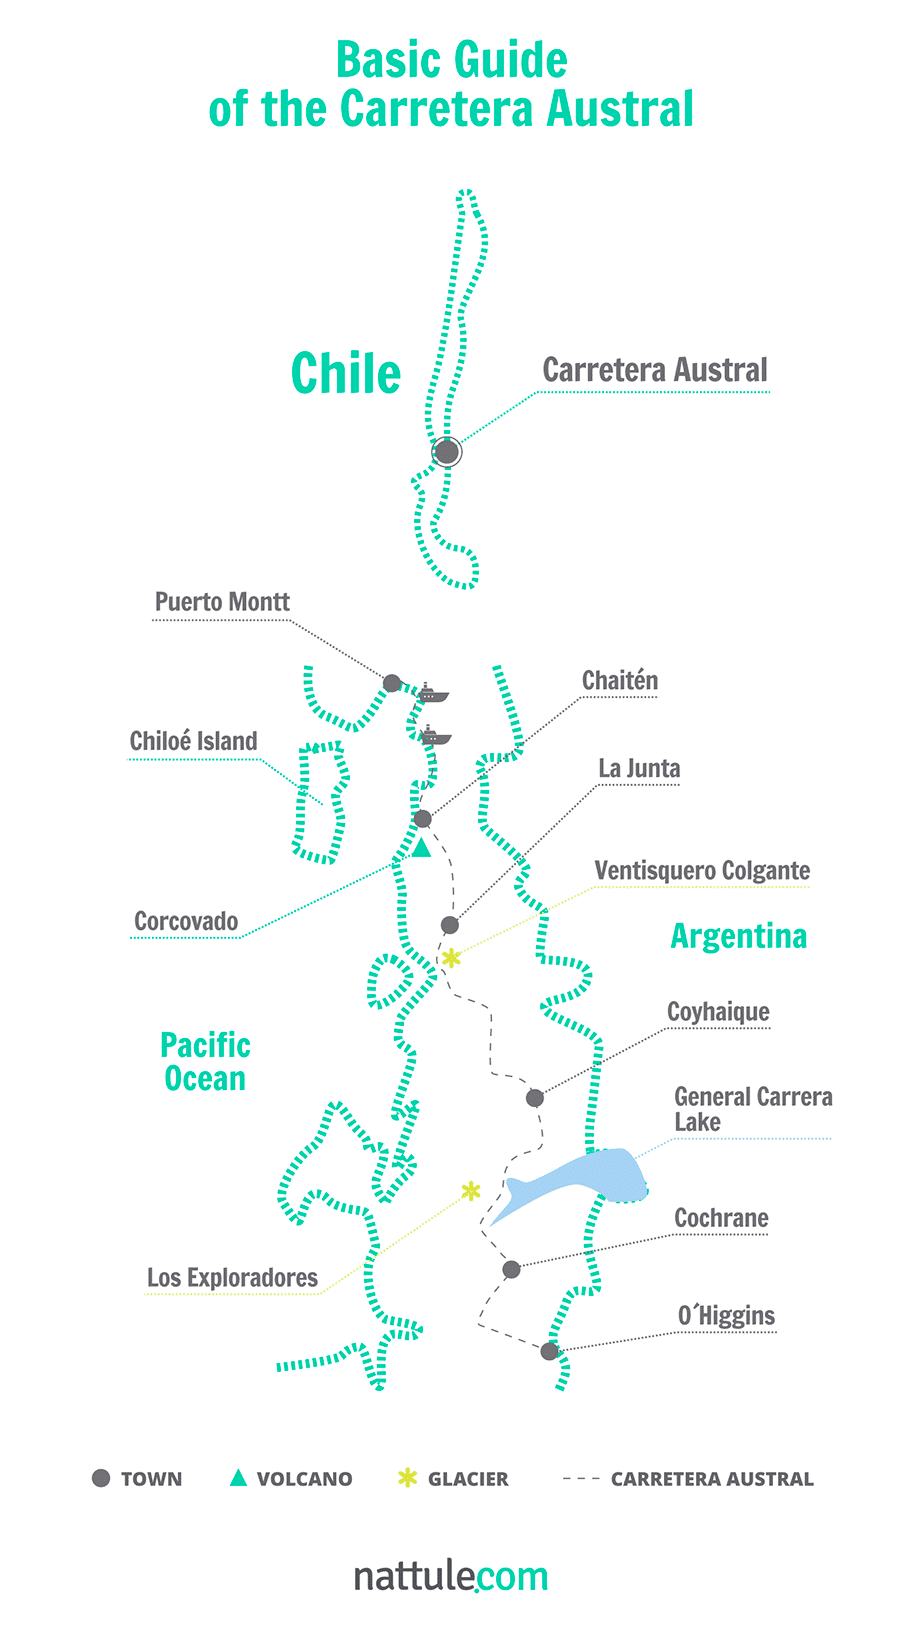 Basic Guide of the Carretera Austral